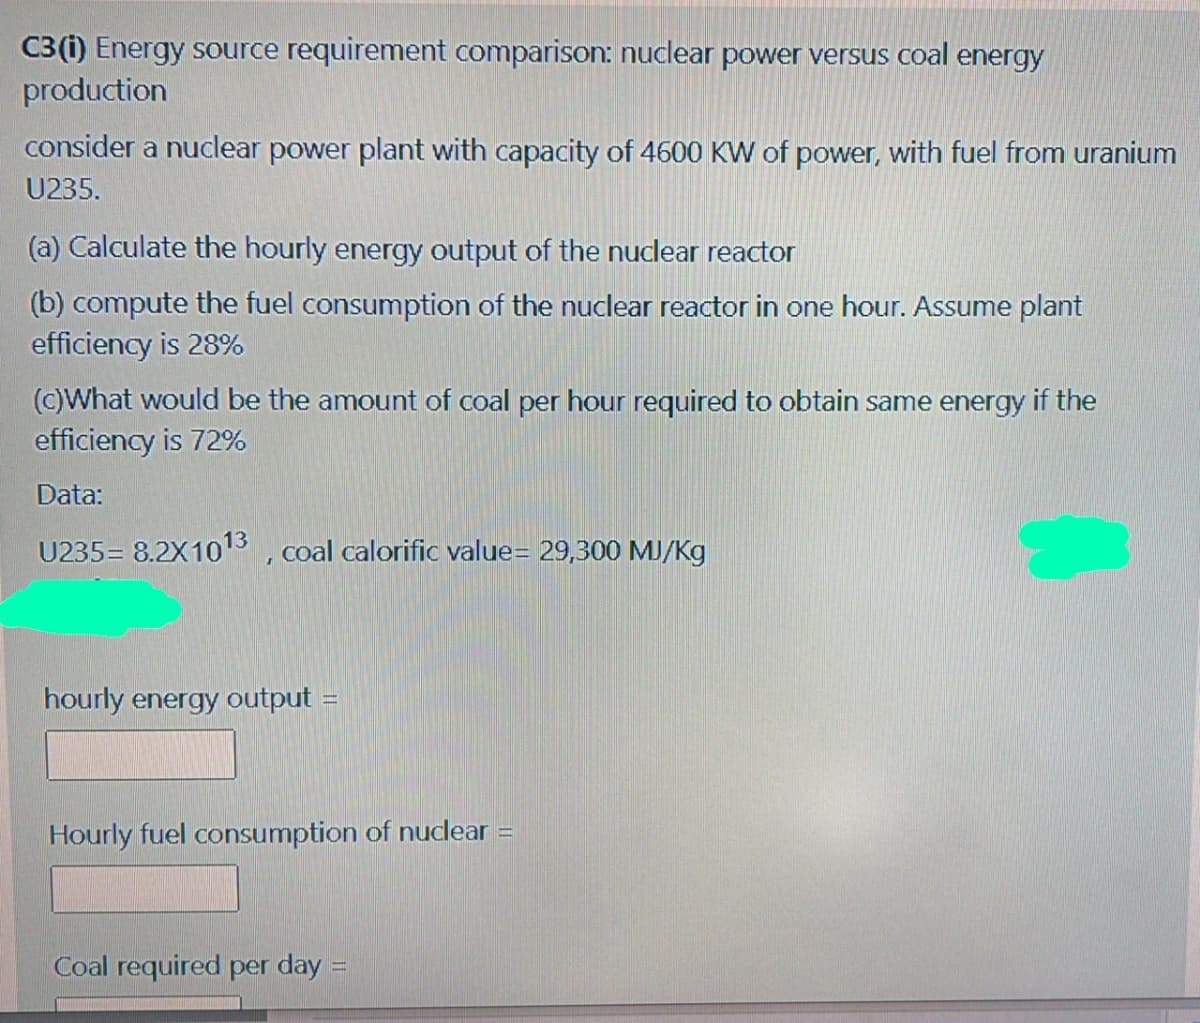 C3(i) Energy source requirement comparison: nuclear power versus coal energy
production
consider a nuclear power plant with capacity of 4600 KW of power, with fuel from uranium
U235.
(a) Calculate the hourly energy output of the nuclear reactor
(b) compute the fuel consumption of the nuclear reactor in one hour. Assume plant
efficiency is 28%
(c)What would be the amount of coal per hour required to obtain same energy if the
efficiency is 72%
Data:
U235= 8.2X103 , coal calorific value= 29,300 MJ/Kg
hourly energy output =
Hourly fuel consumption of nuclear =
Coal required per day =
